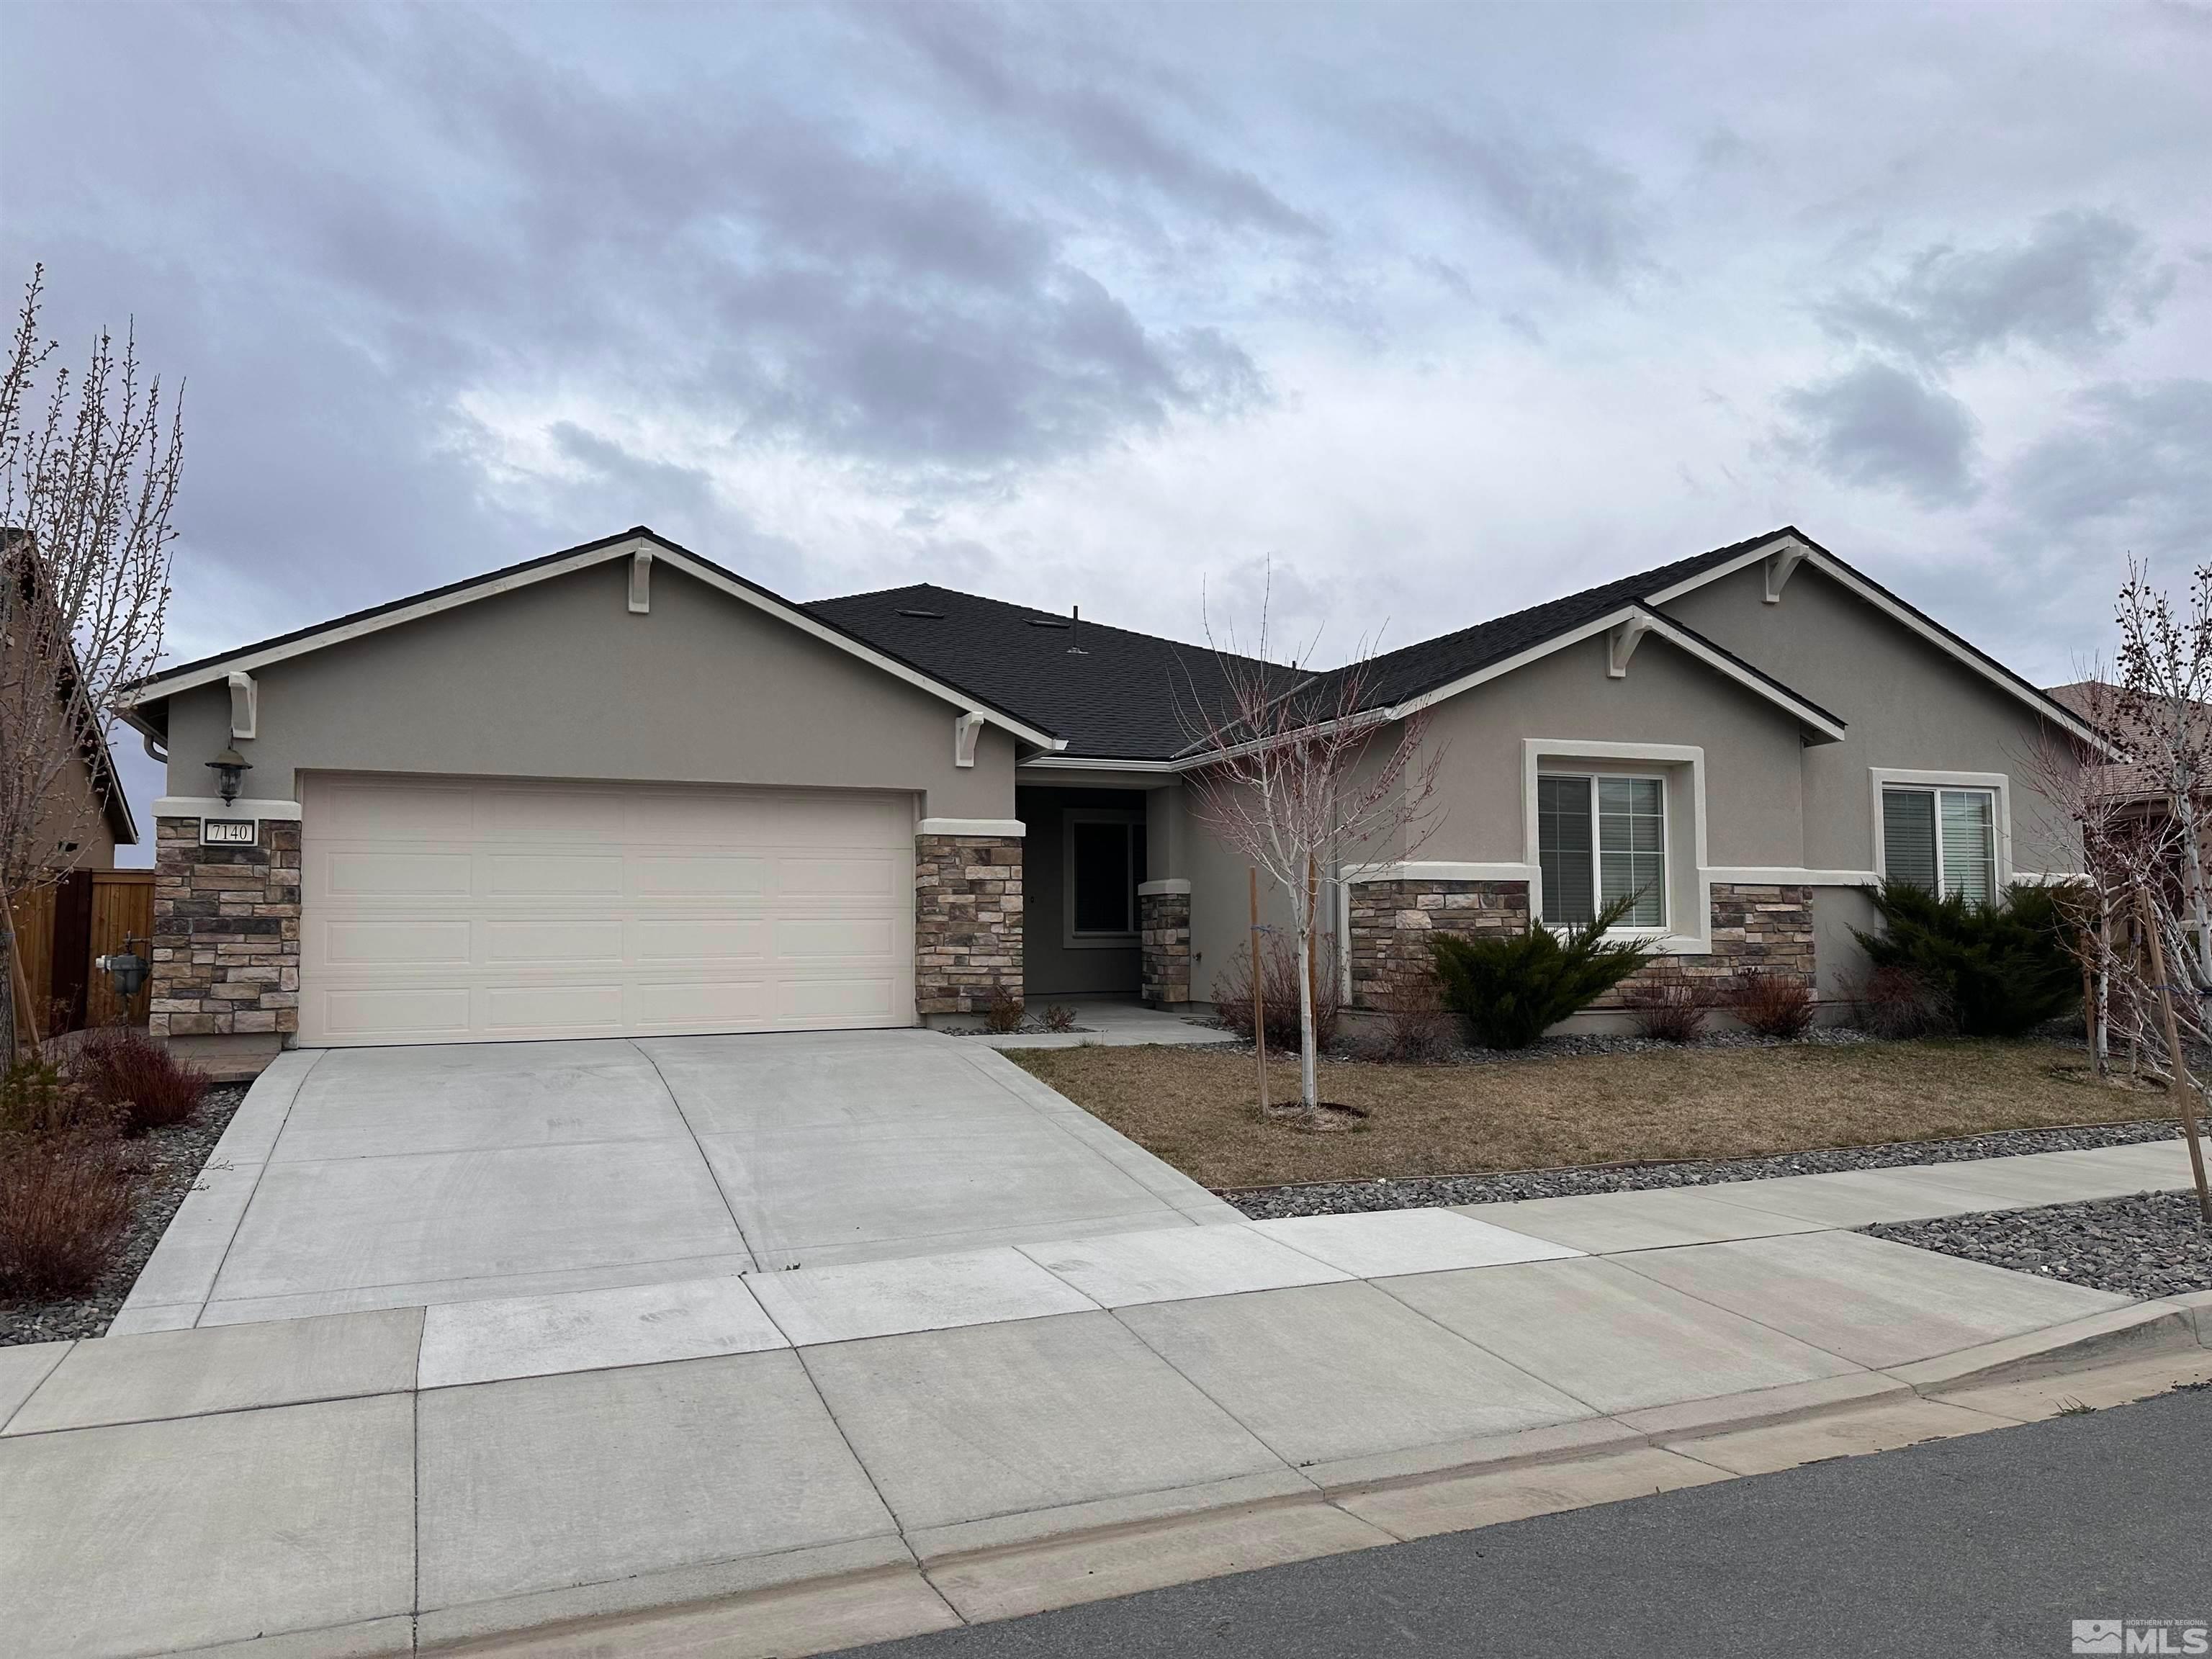 Quill Dr, Reno, NV 89506